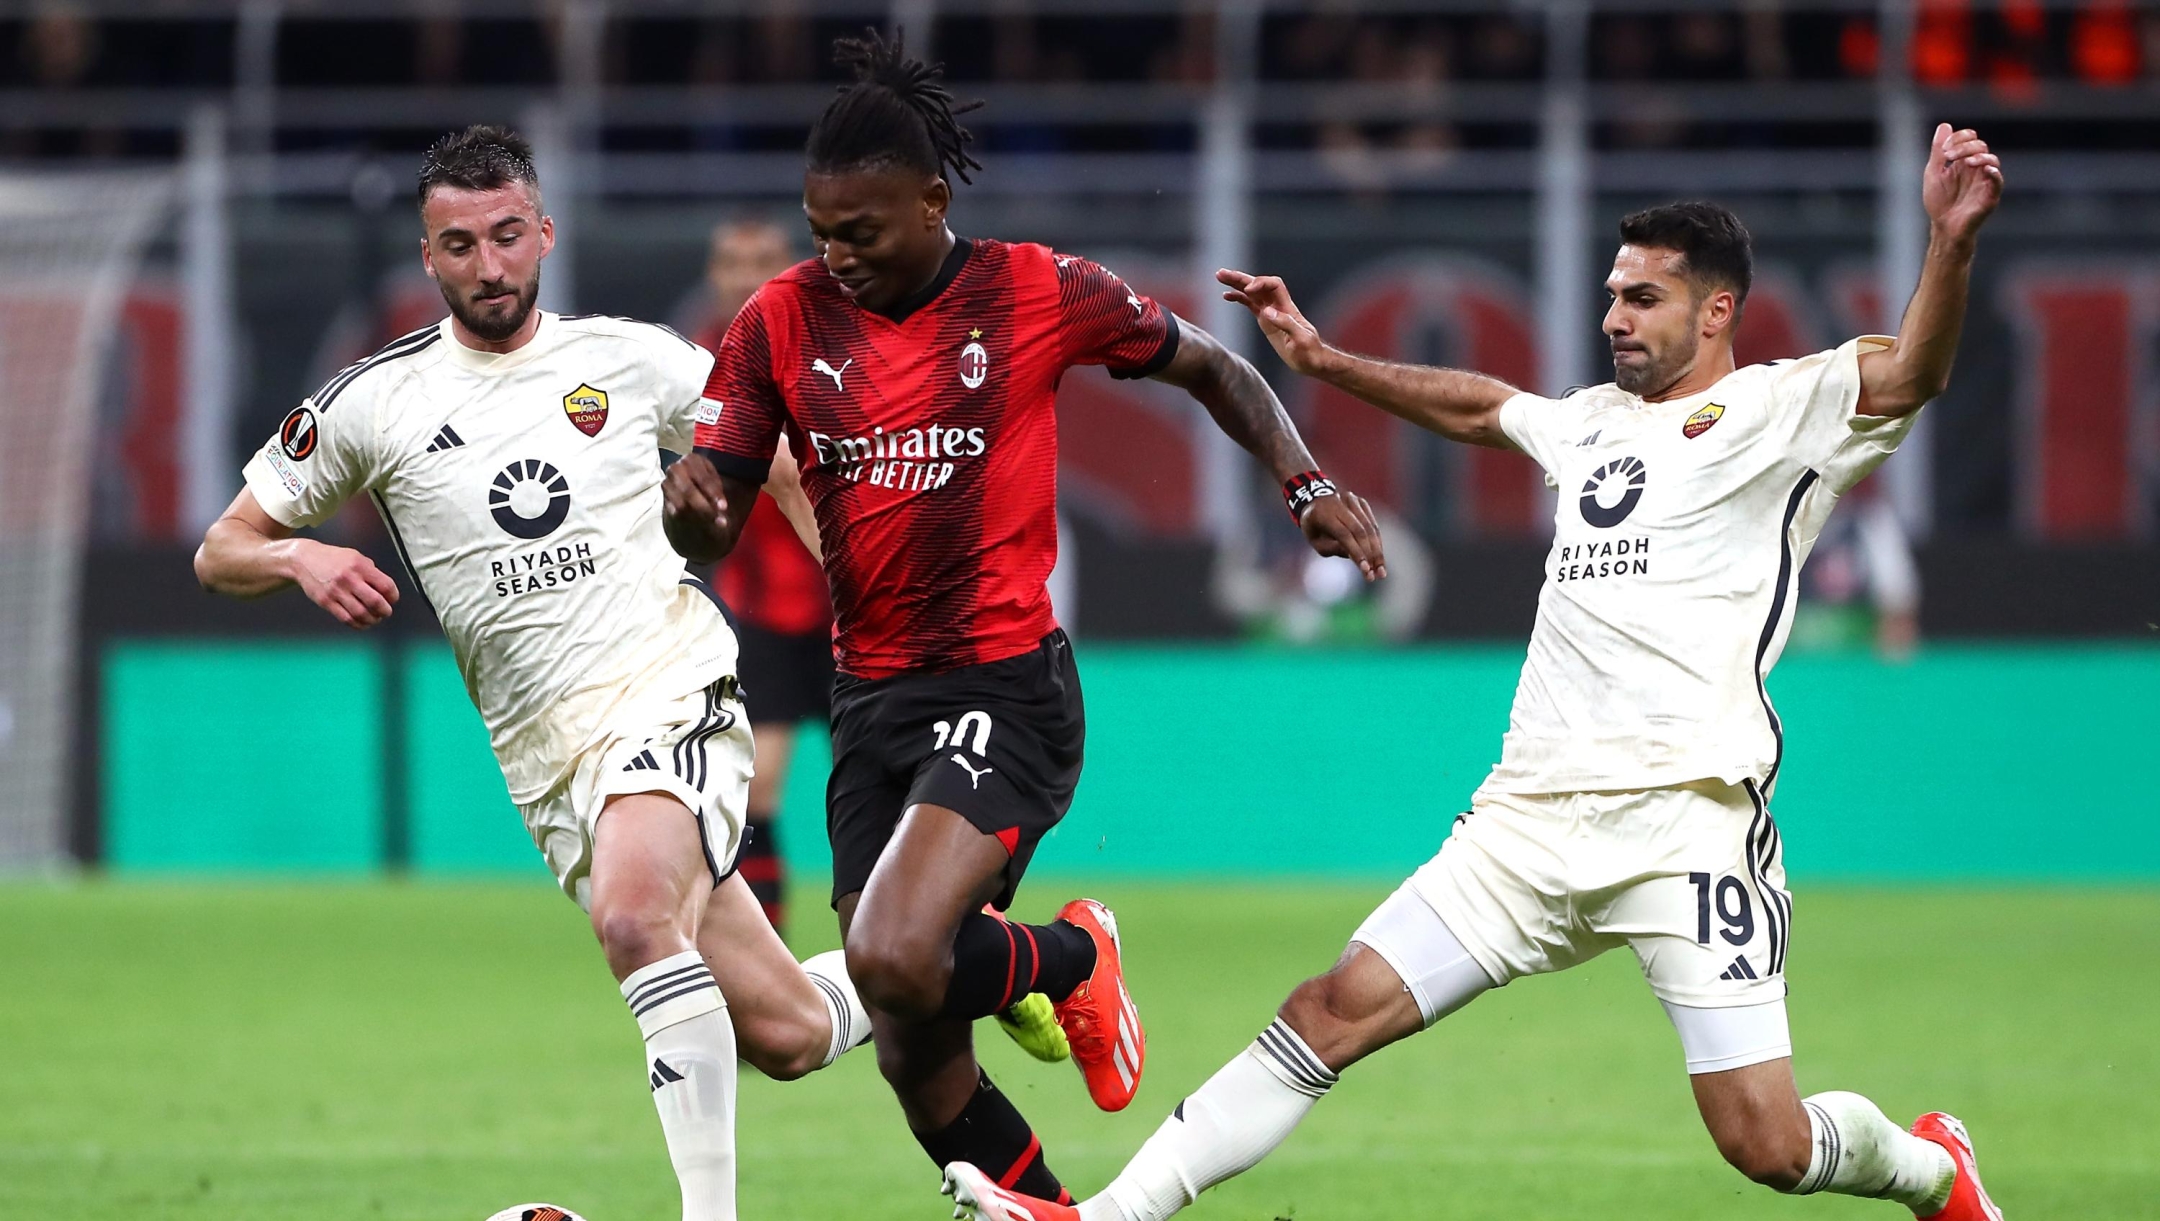 MILAN, ITALY - APRIL 11: Rafael Leao of AC Milan battles for possession with Bryan Cristante and Zeki Celik of AS Roma during the UEFA Europa League 2023/24 Quarter-Final first leg match between AC Milan and AS Roma at Stadio Giuseppe Meazza on April 11, 2024 in Milan, Italy. (Photo by Marco Luzzani/Getty Images)